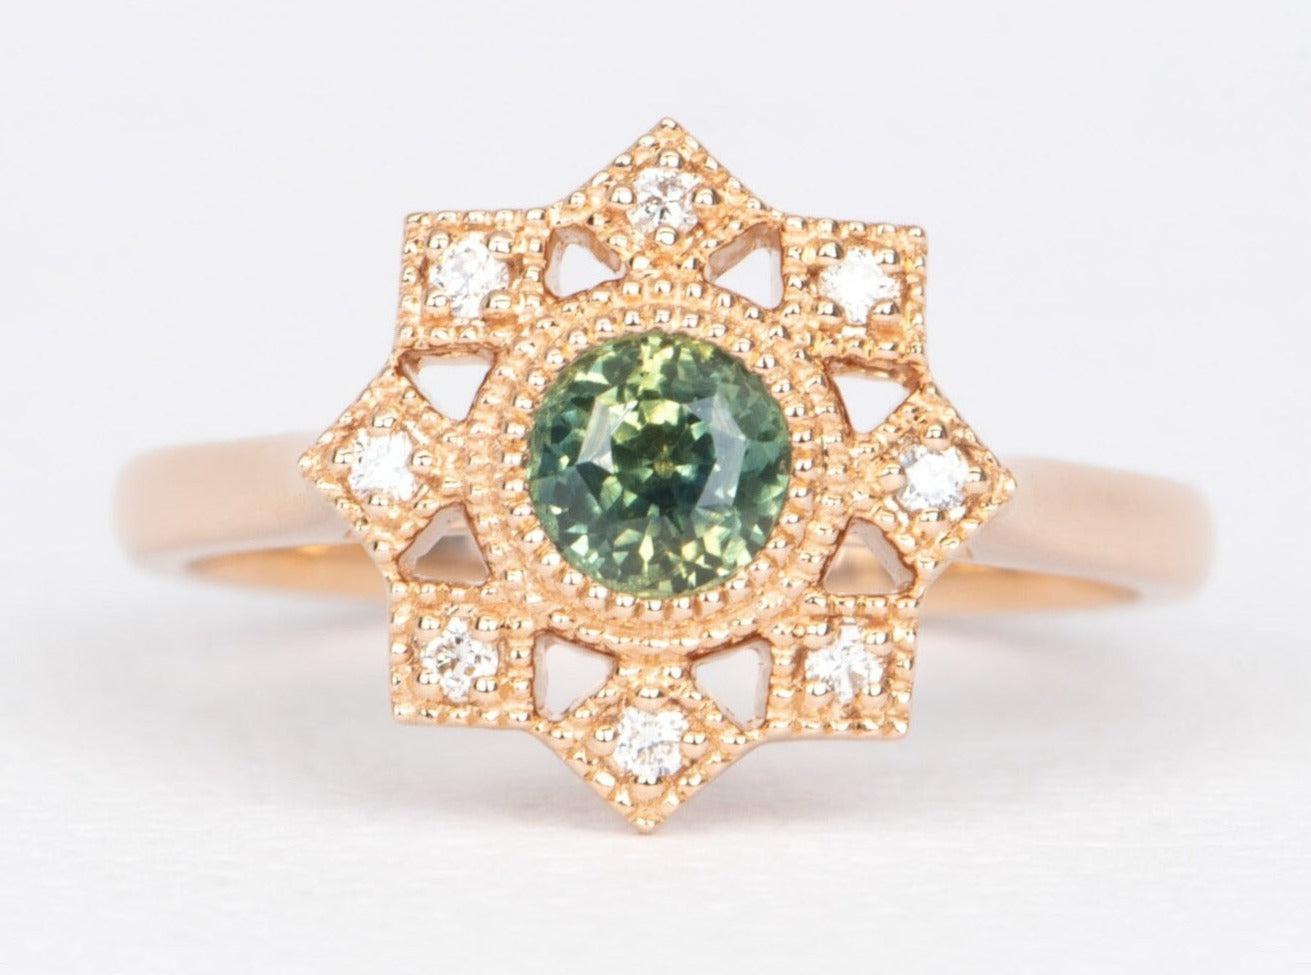 ♥ A solid 14K rose gold ring set with a round teal green Montana sapphire in the center with a milgrain diamond halo
♥The setting measures 12.9 mm in length, 13 mm in width, and sits 5.8 mm tall on the finger

♥ Solid 14K rose gold
♥ Band width: 2